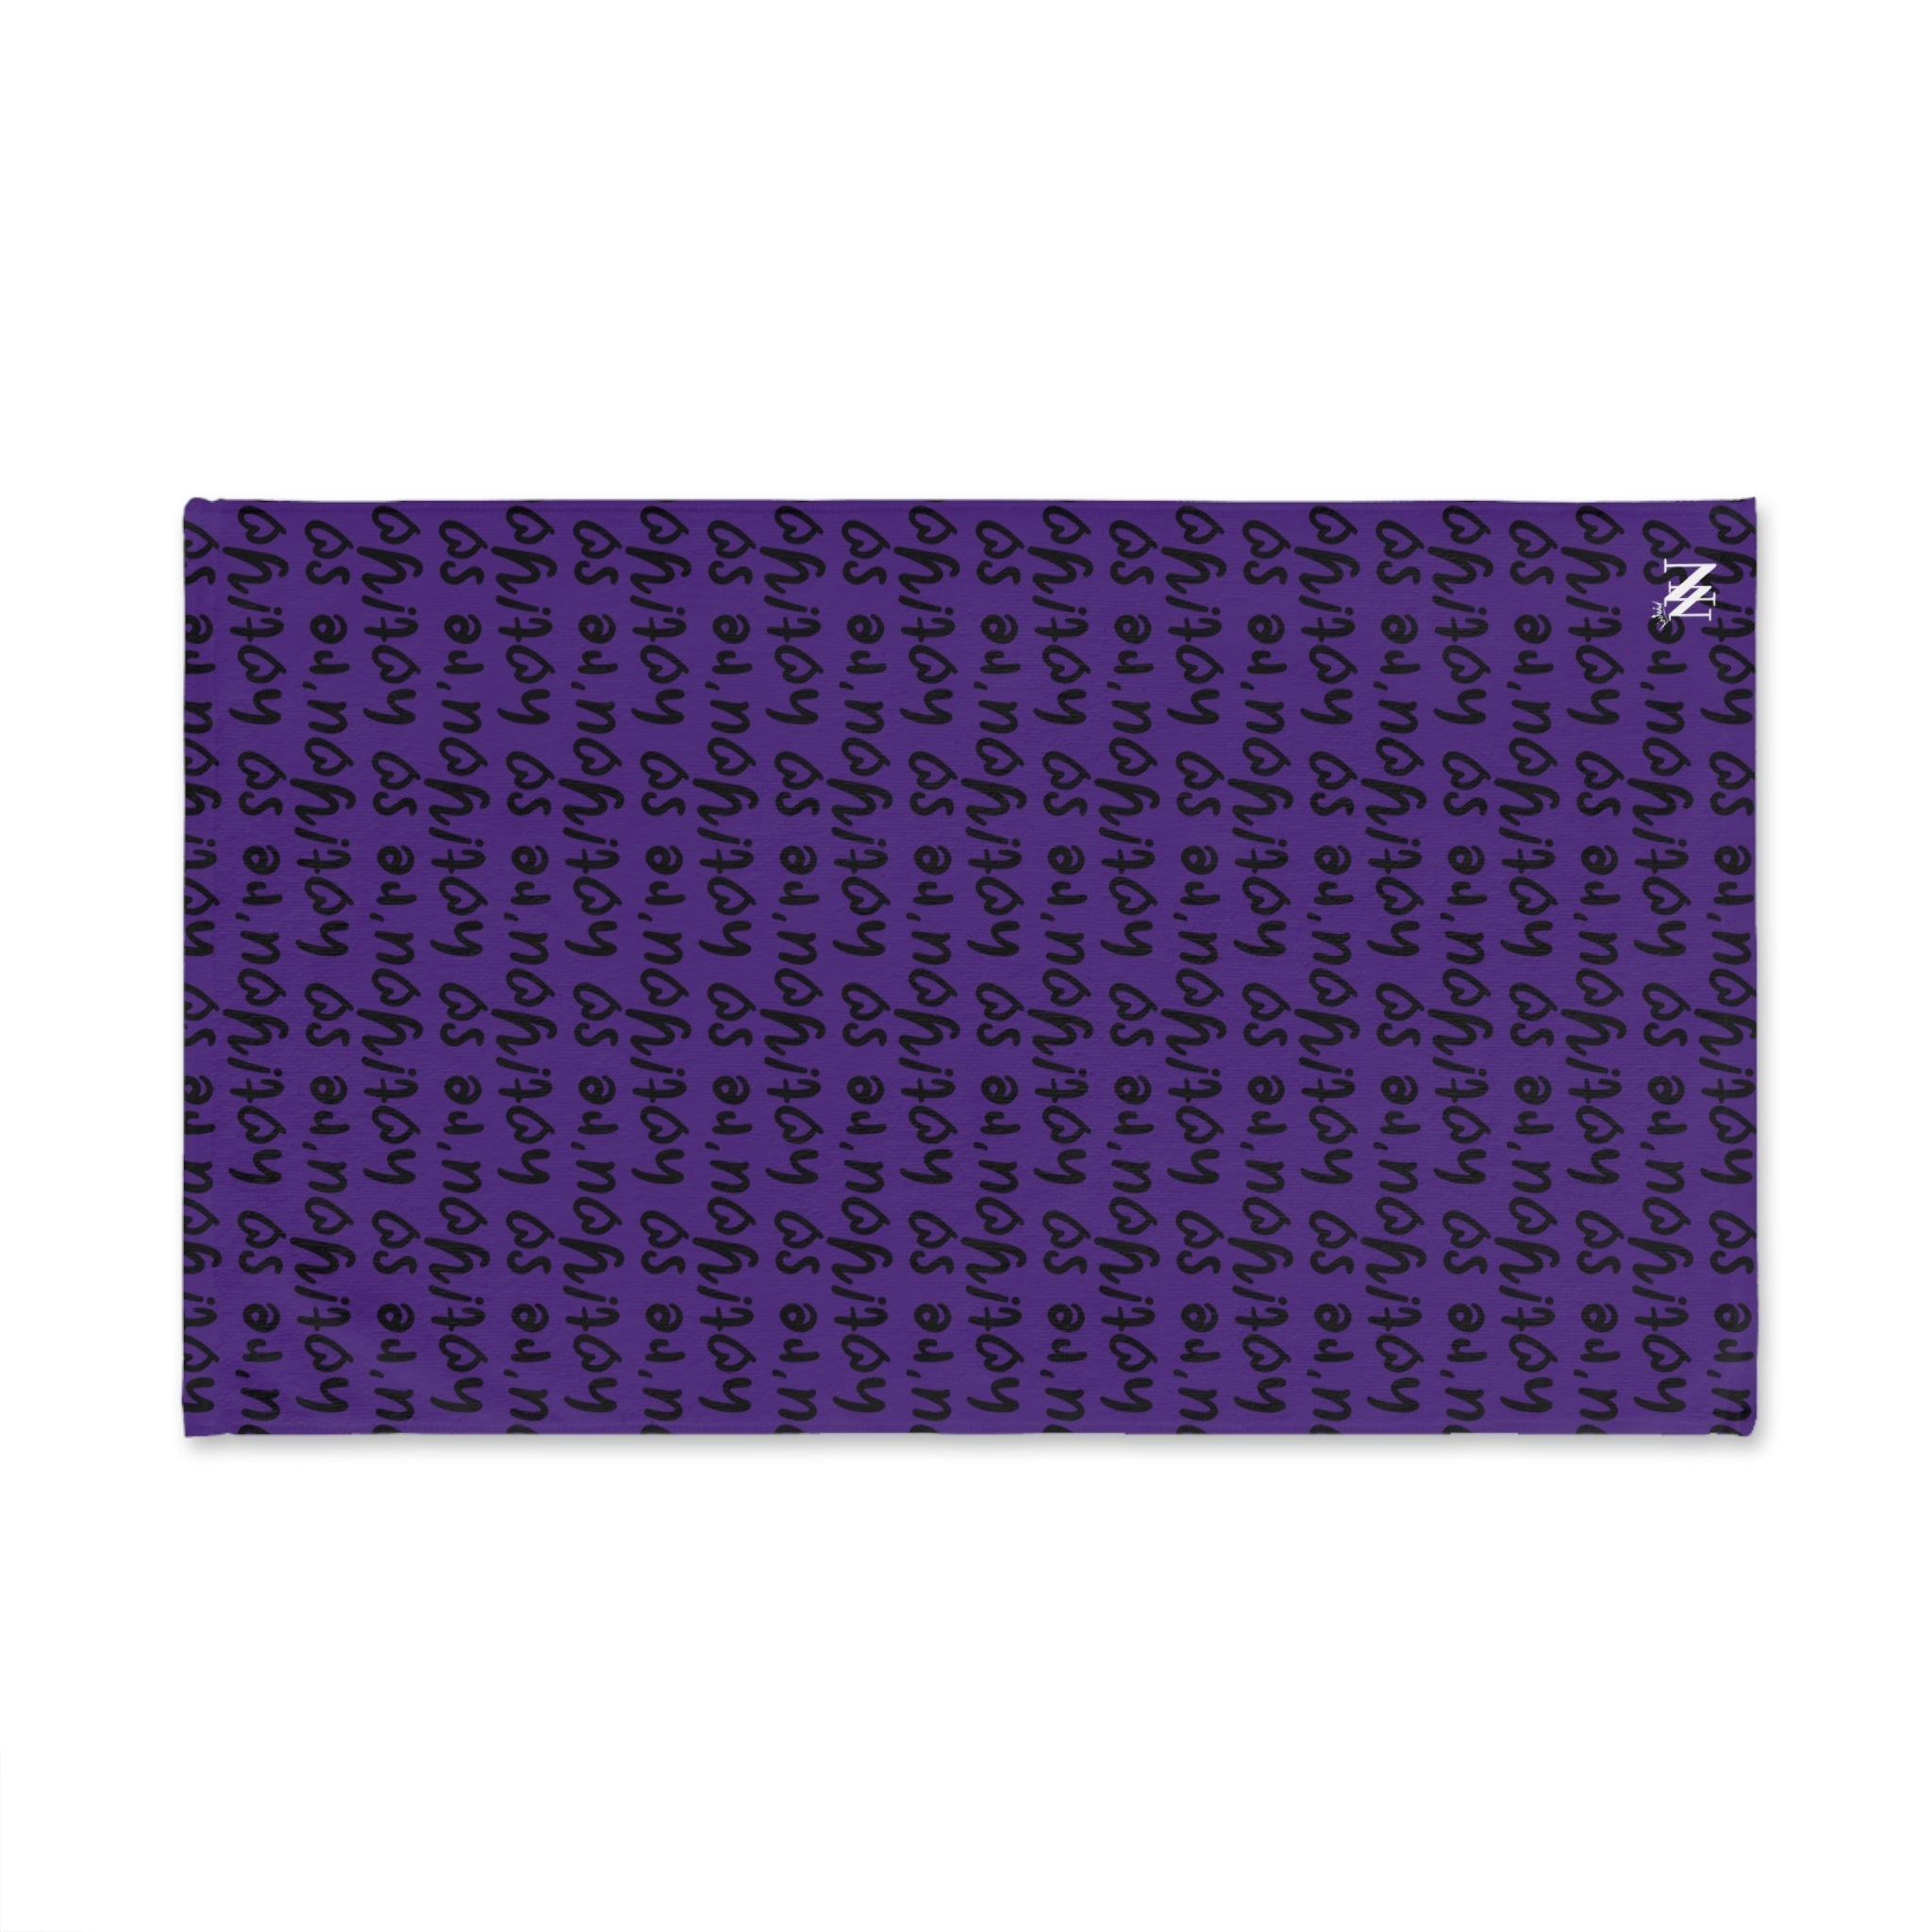 Hot Pattern You So Purple | Funny Gifts for Men - Gifts for Him - Birthday Gifts for Men, Him, Husband, Boyfriend, New Couple Gifts, Fathers & Valentines Day Gifts, Christmas Gifts NECTAR NAPKINS